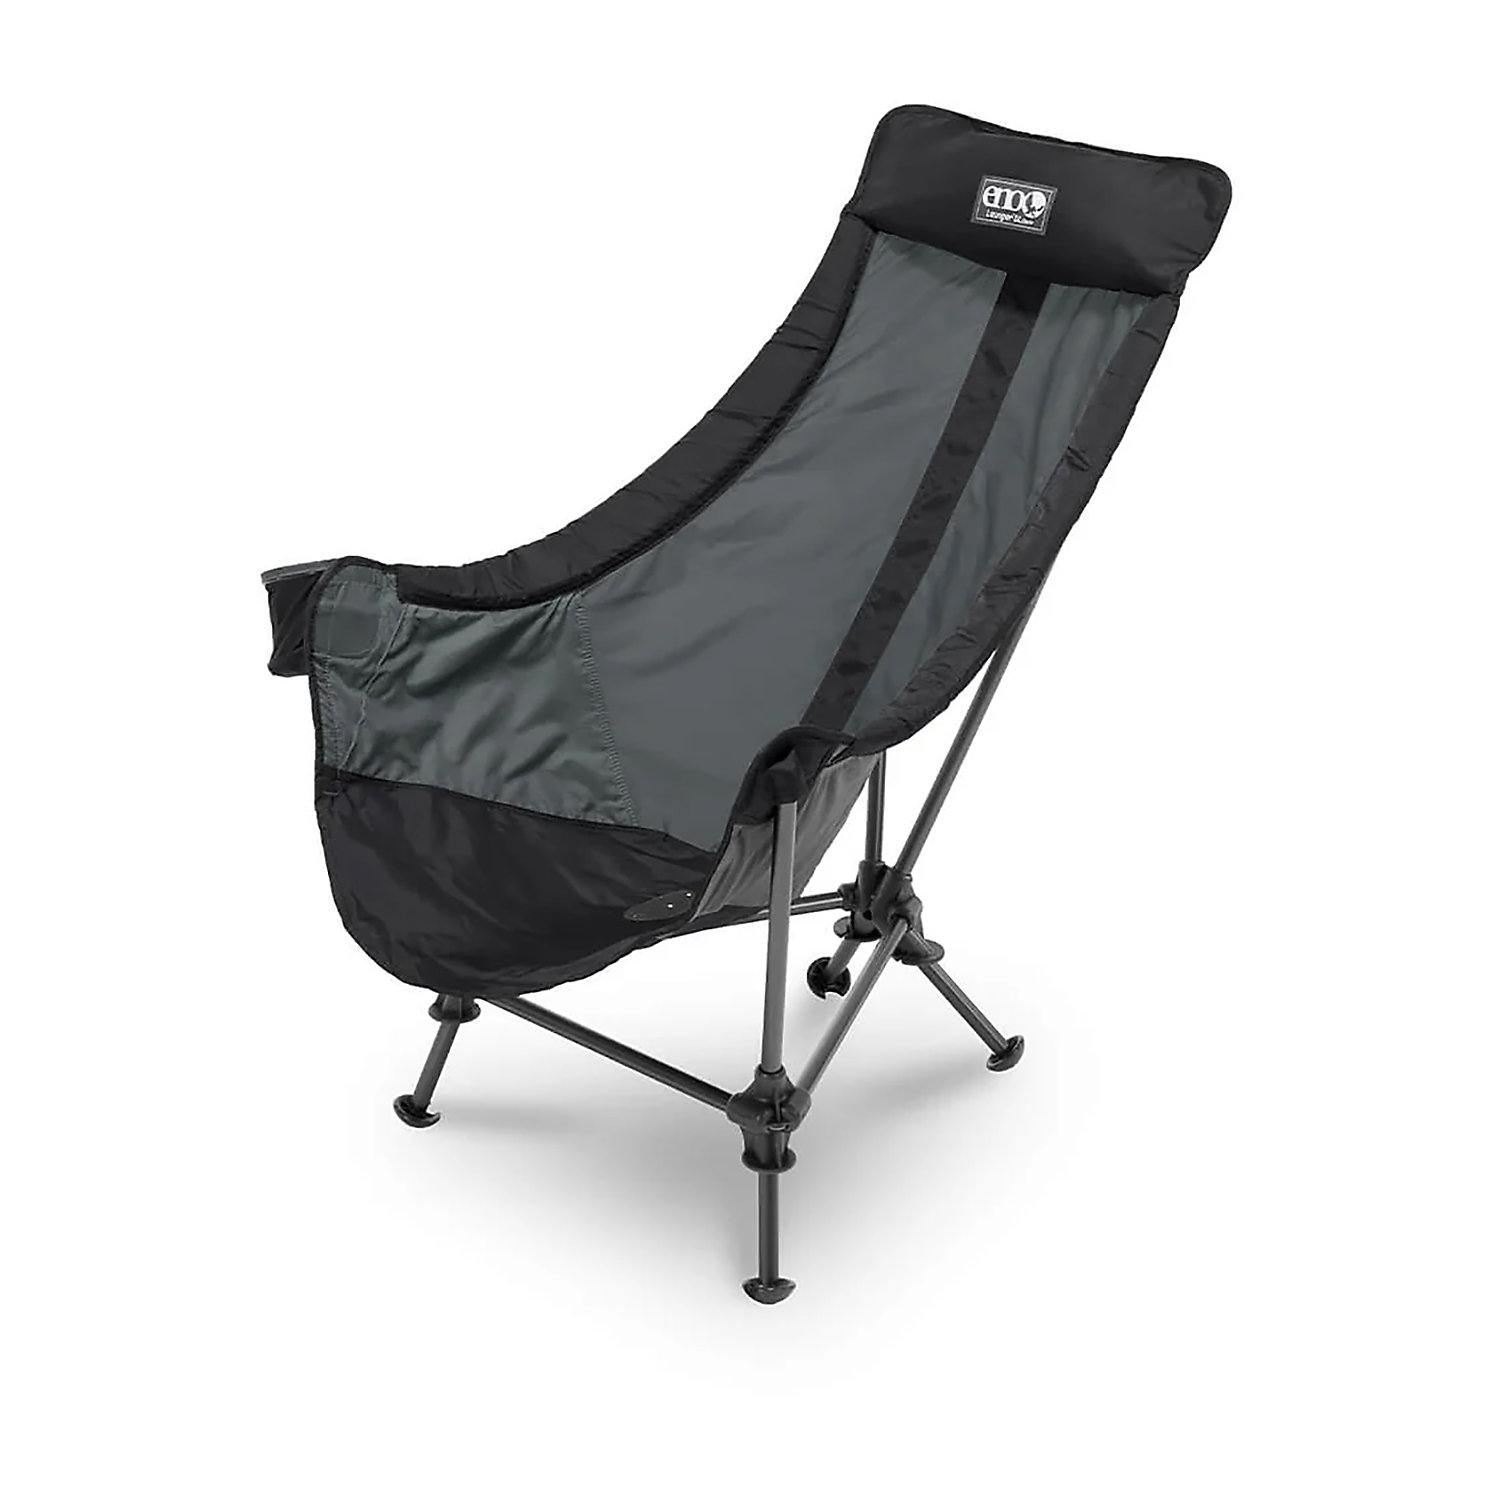 Eagles Nest Outfitters Lounger DL Chair